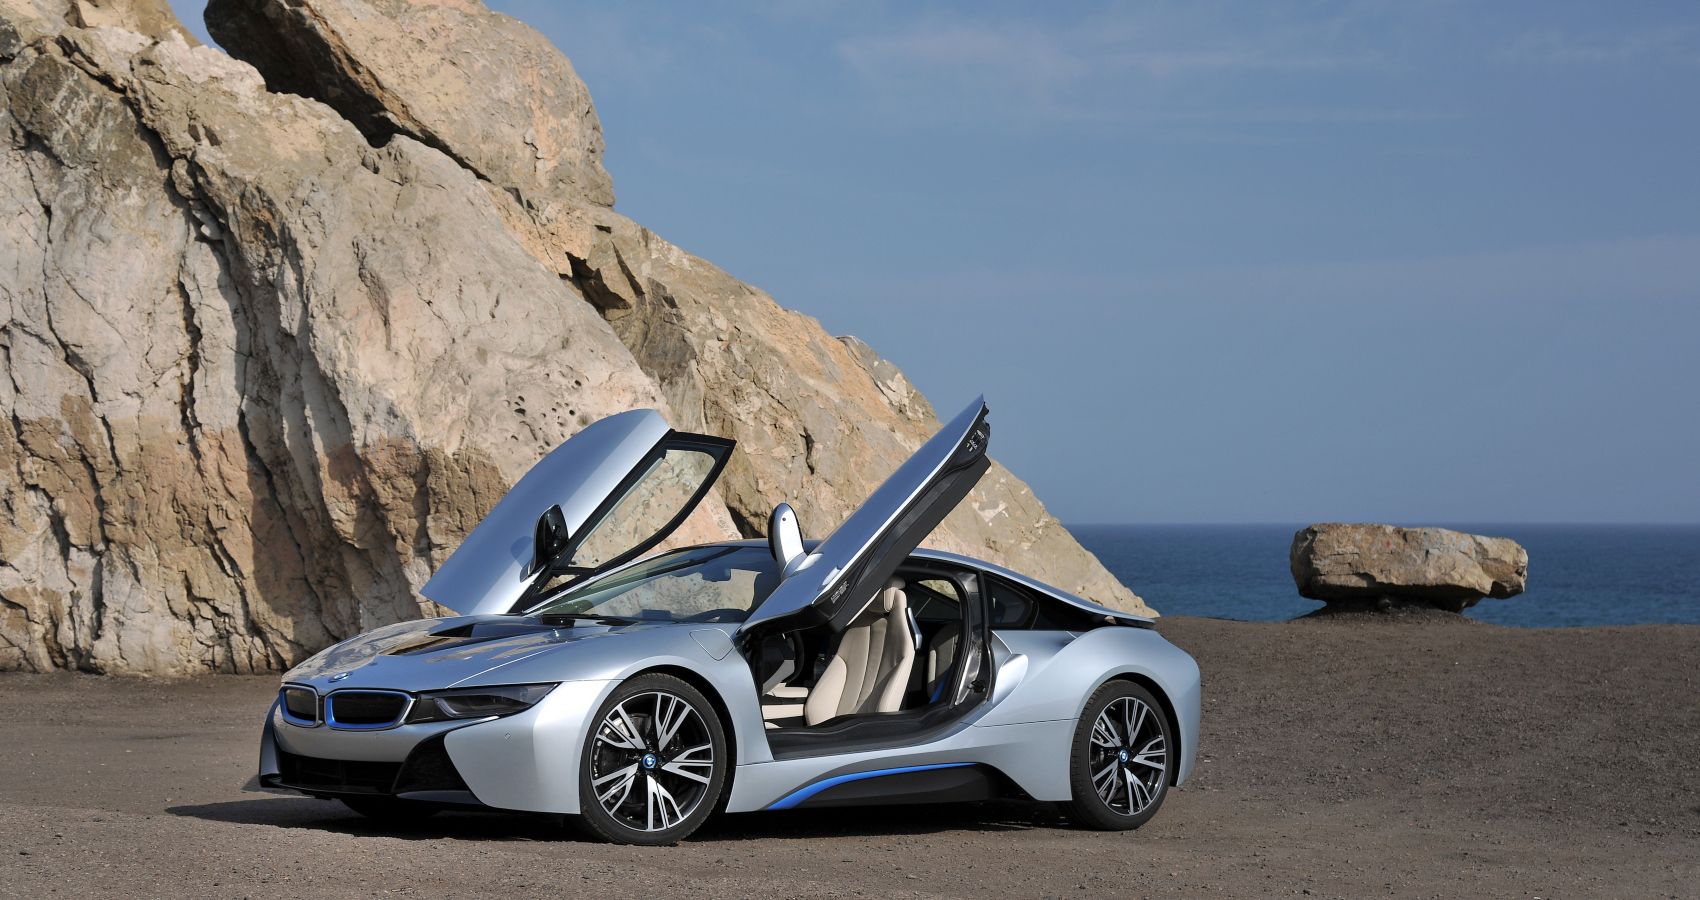 Side view of BMW i8 with doors open